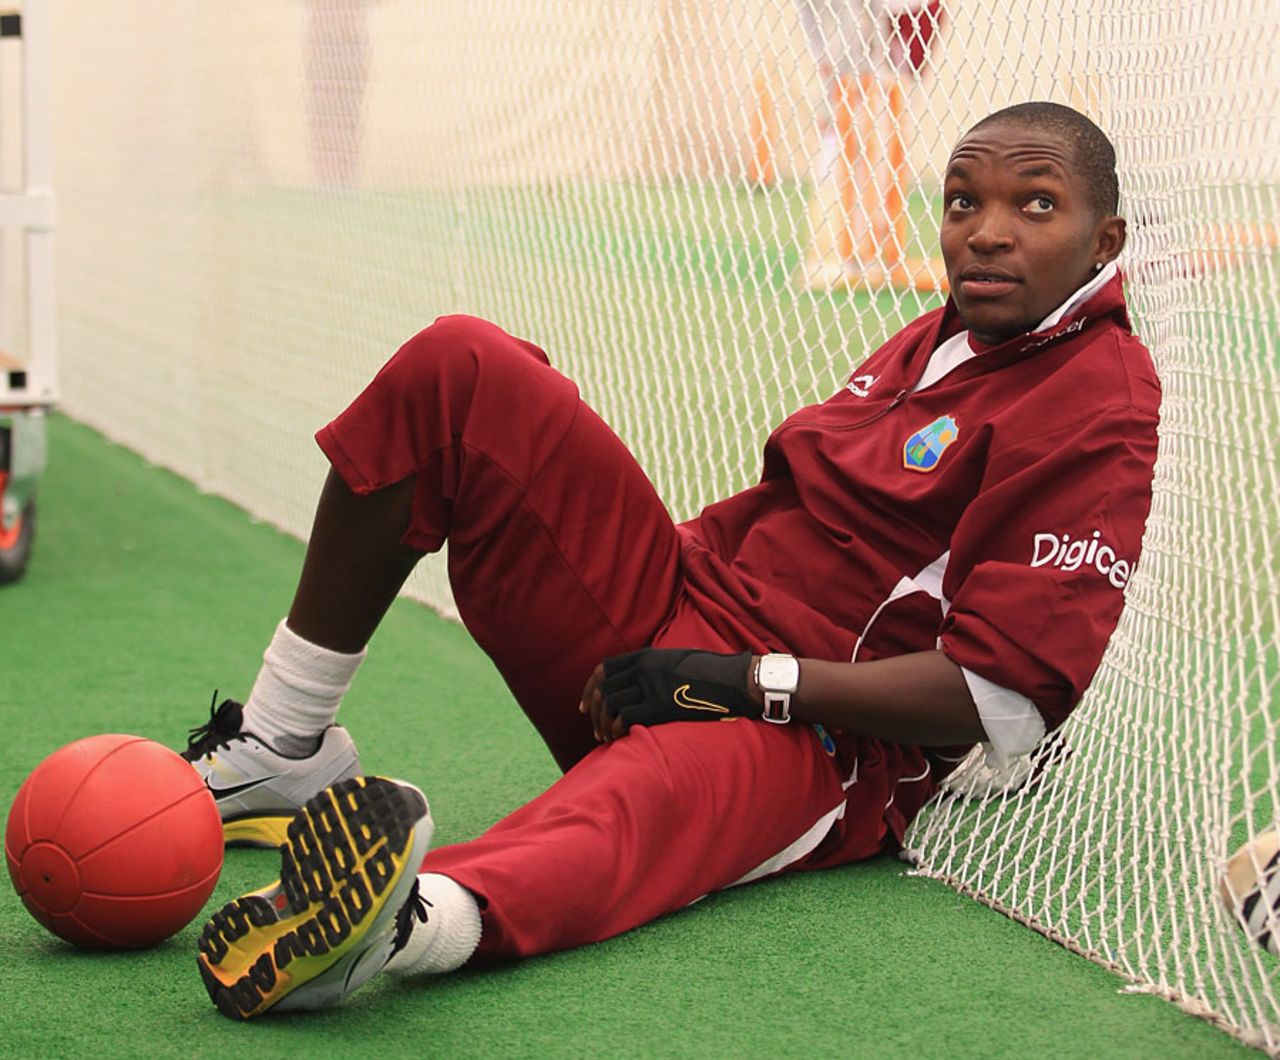 Fidel Edwards has a quiet moment during indoor training, Lord's, May 15, 2012